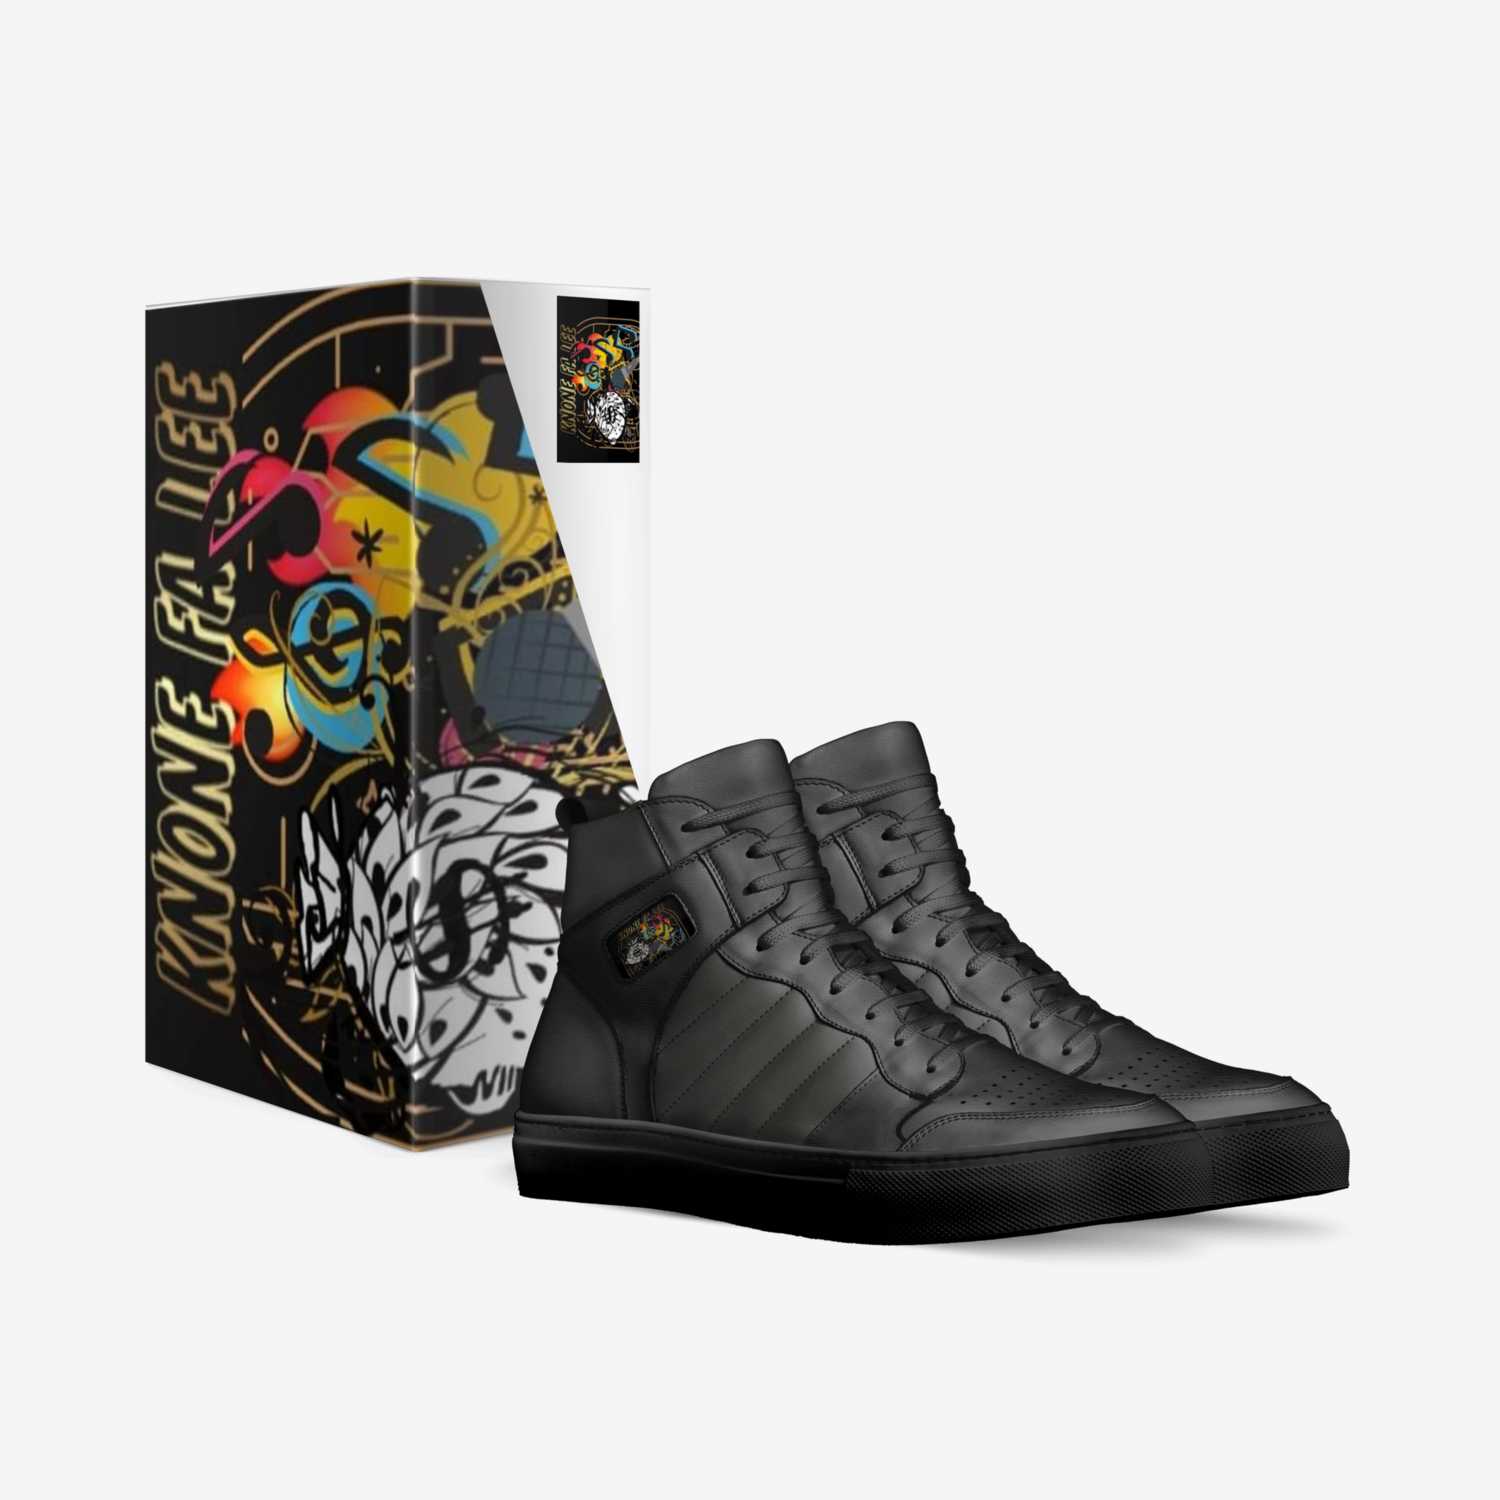 Knone fa lee custom made in Italy shoes by Knone Fa Lee | Box view